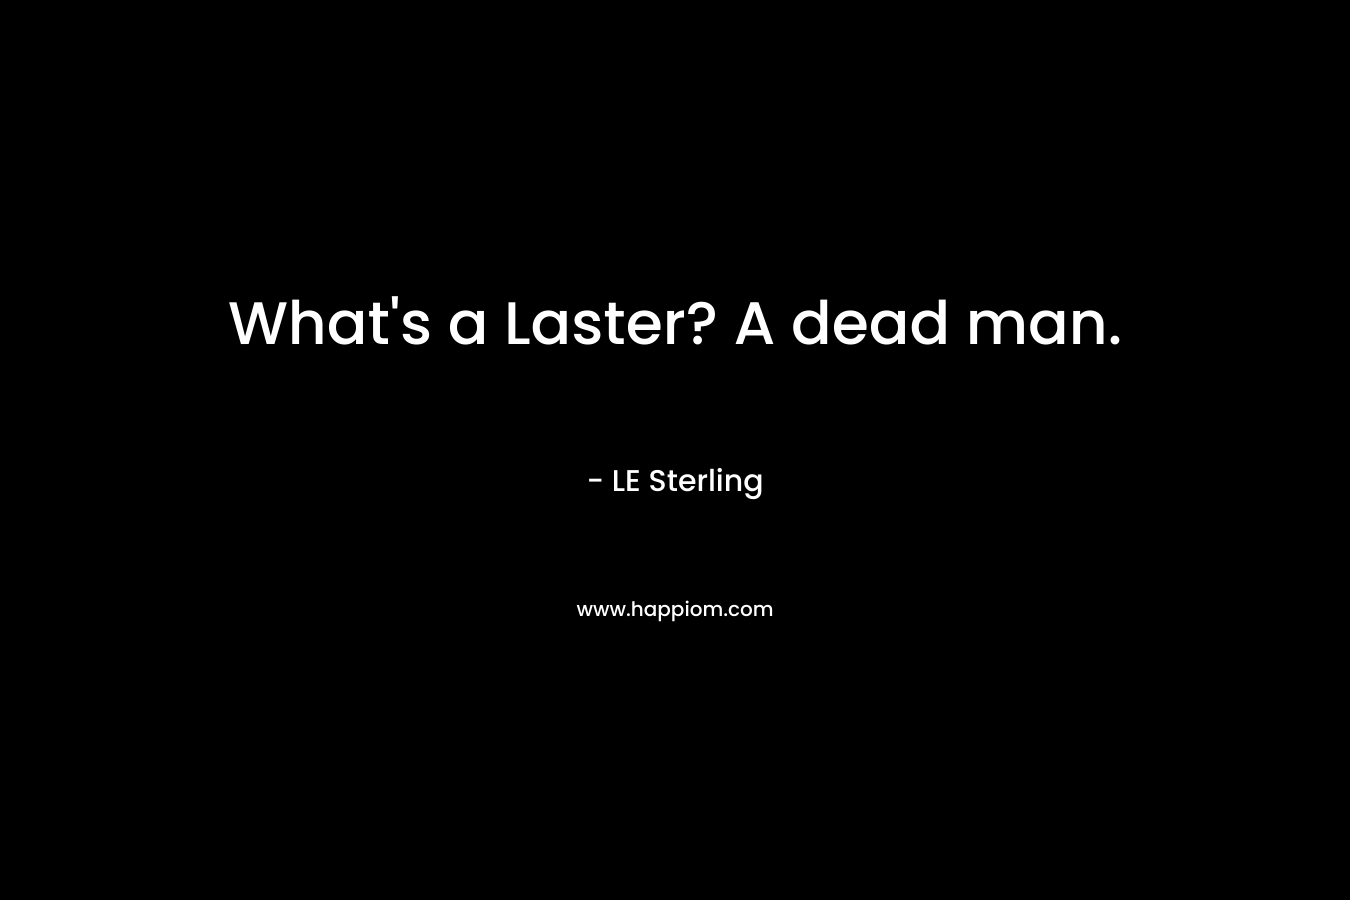 What's a Laster? A dead man.